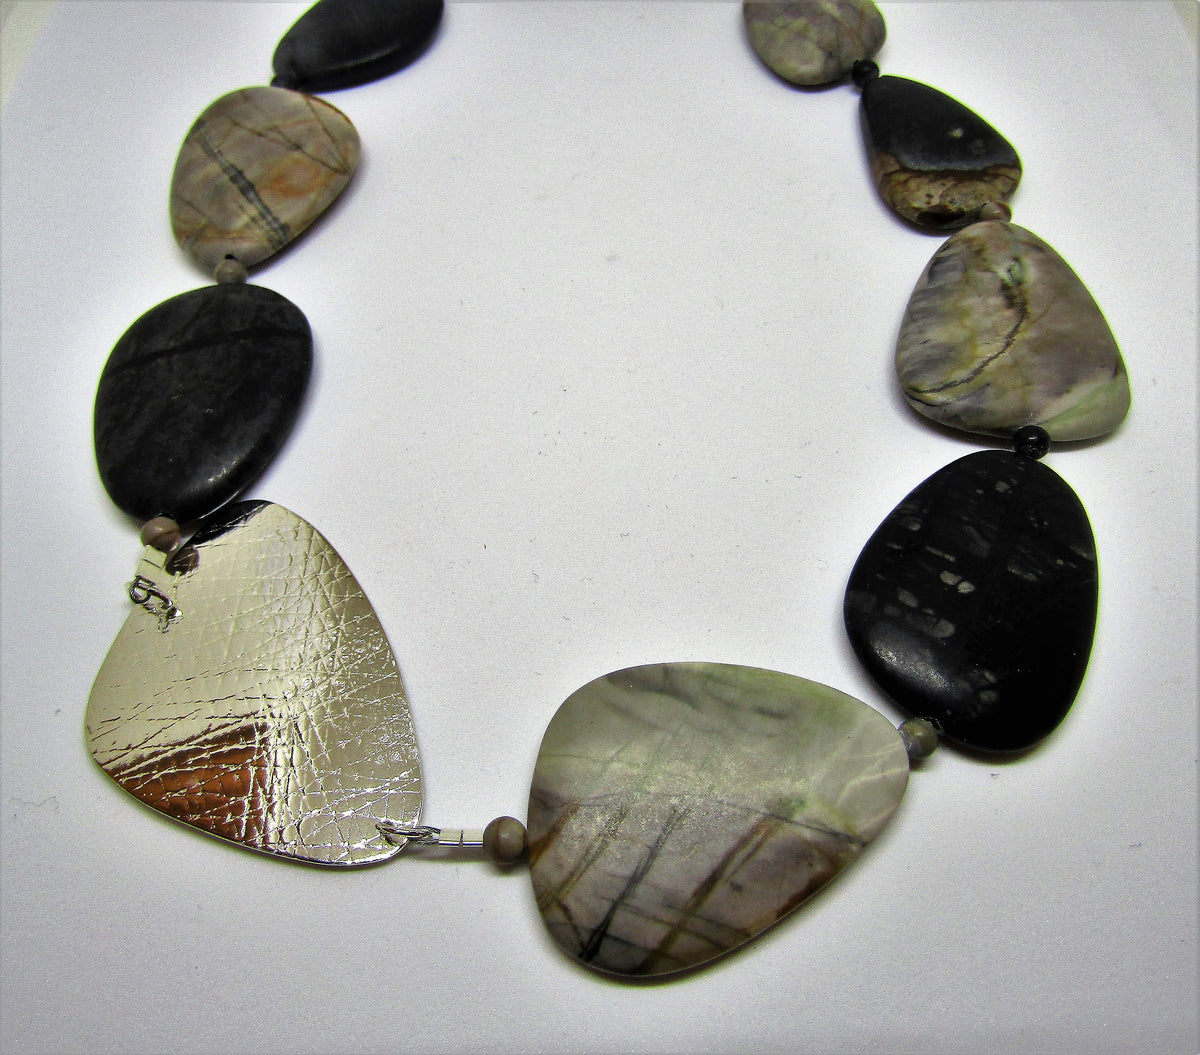 Stunning triangle necklace with picasso jasper. Hand-crafted by studio jeweller Angela Learoyd.